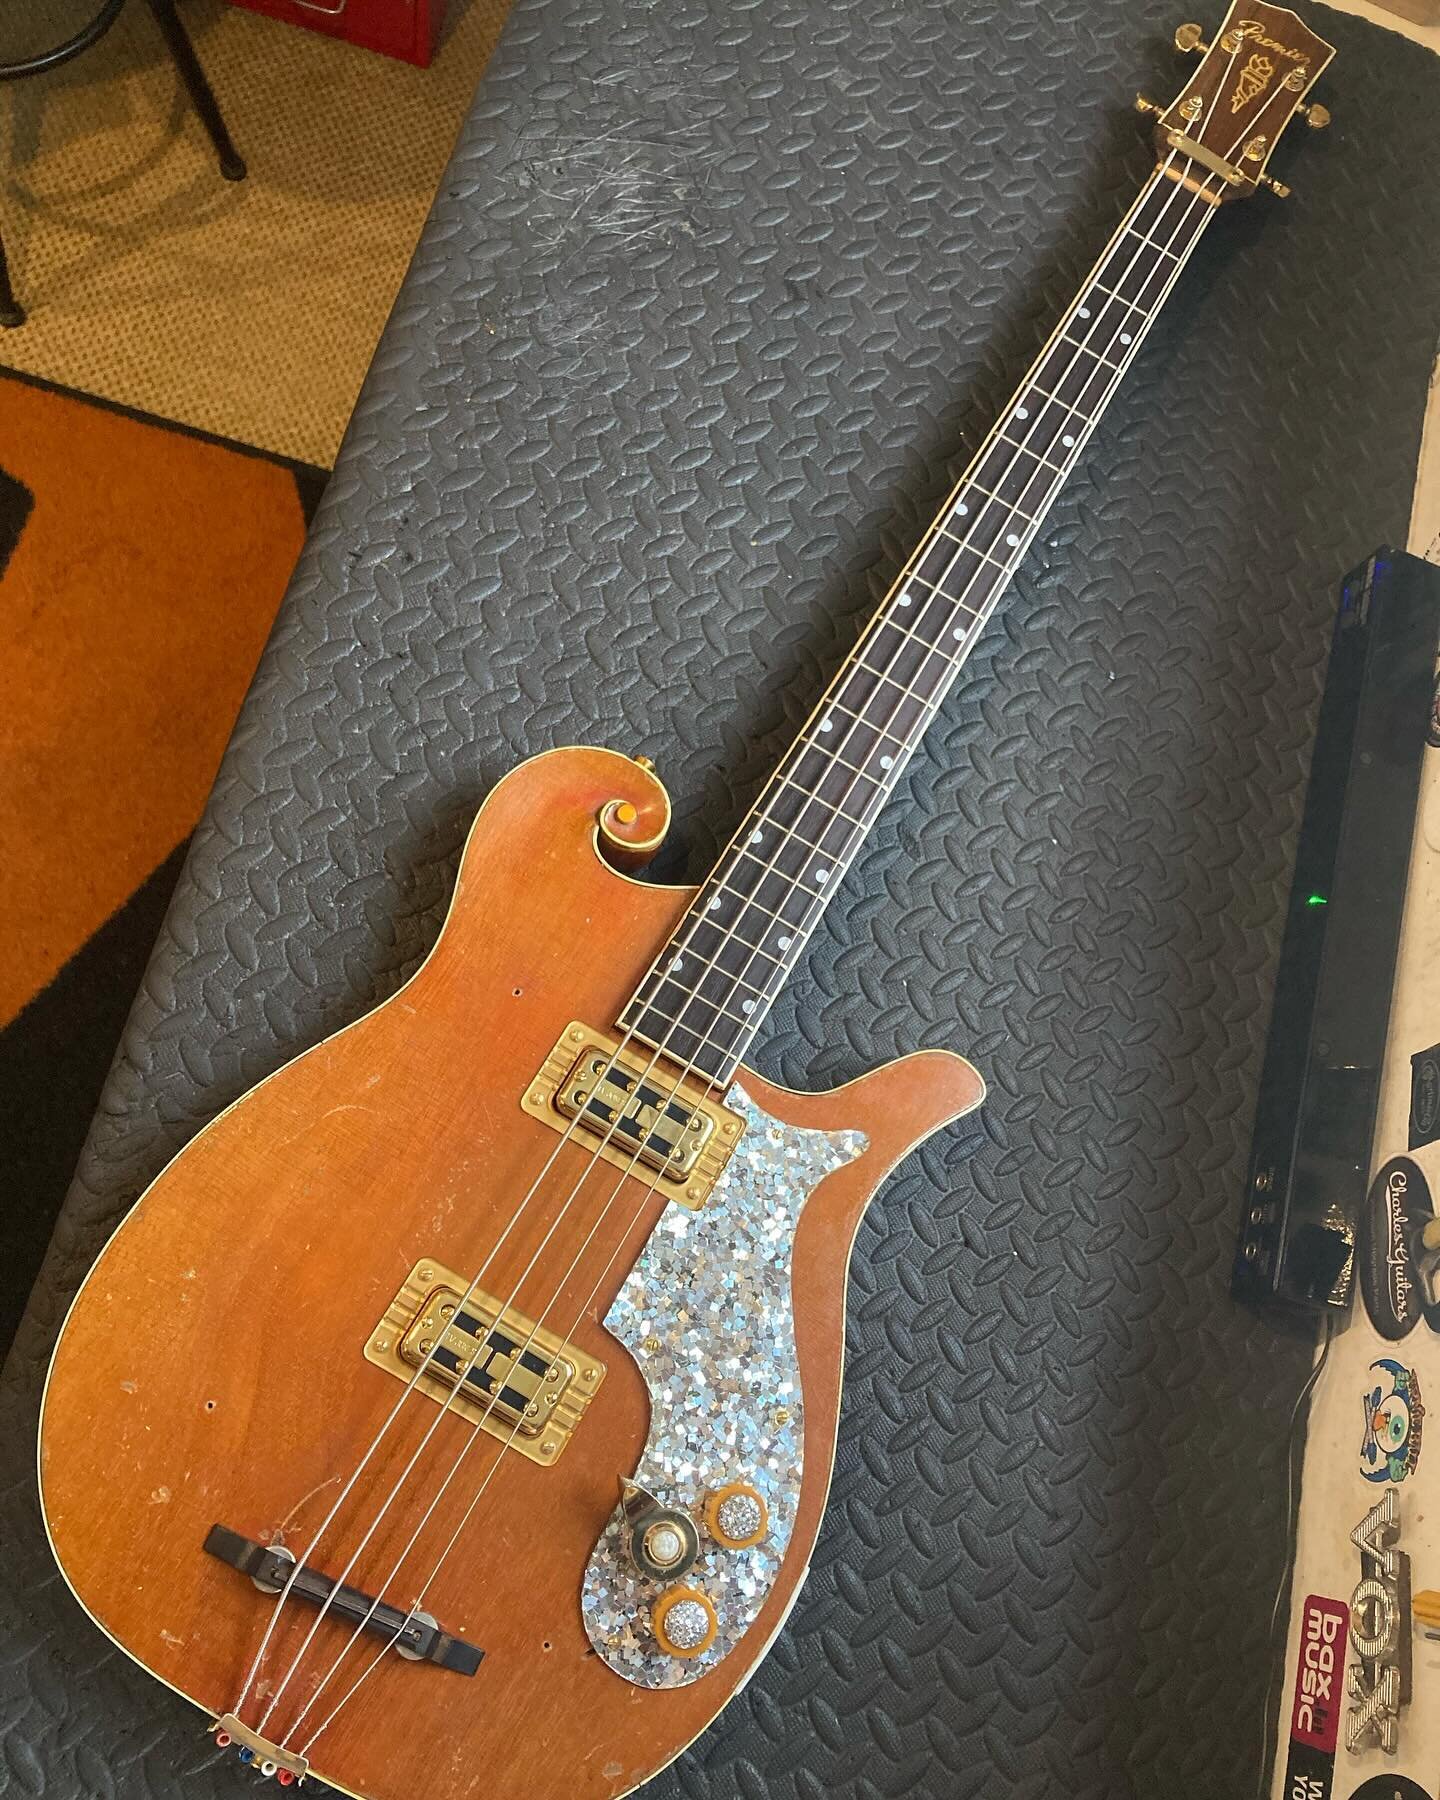 Seems we&rsquo;ve not had much bass representation in the house much recently, so let&rsquo;s correct that with this really cool old Premier bass project from the 60&rsquo;s! The owner bought this bass years ago as a husk (just the body and neck) wit